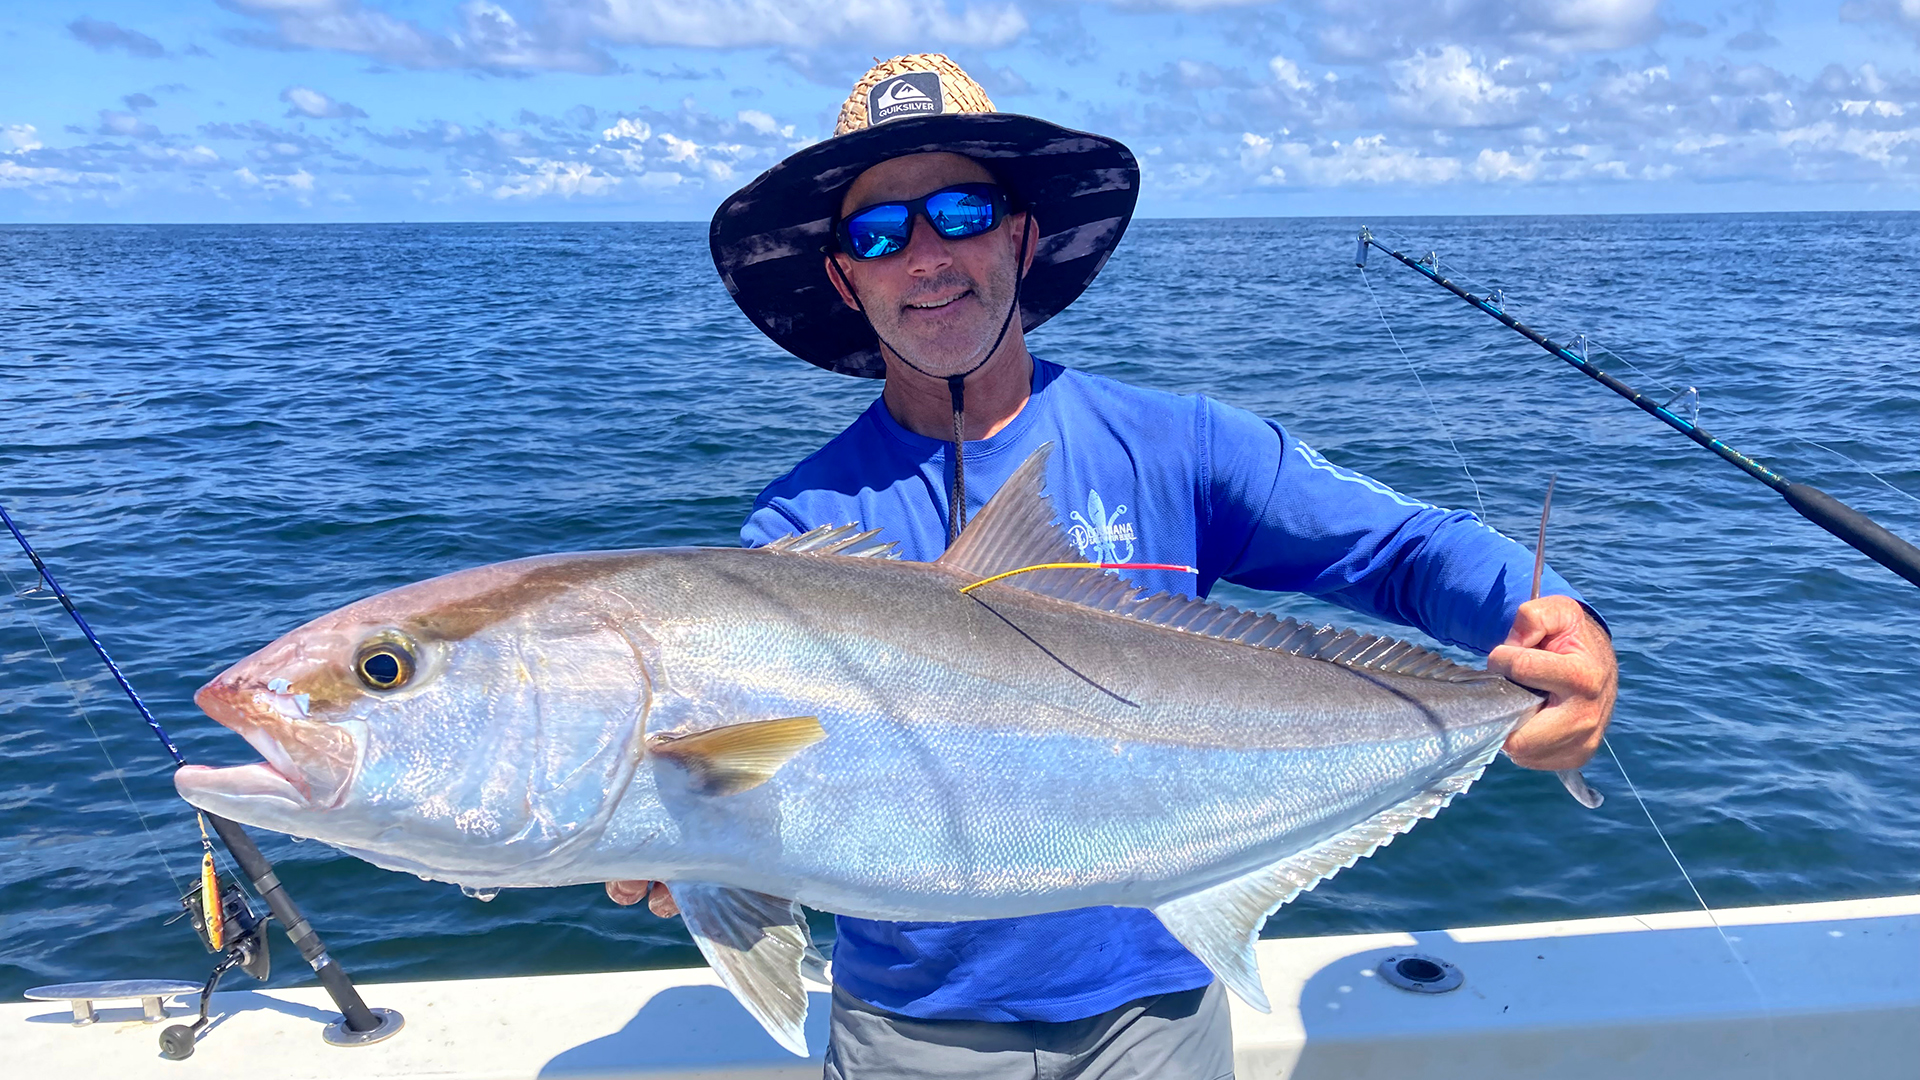 Greater-Amberjack-fish-project-in-the-Gulf-of-Mexico-Atlantic-Ocean